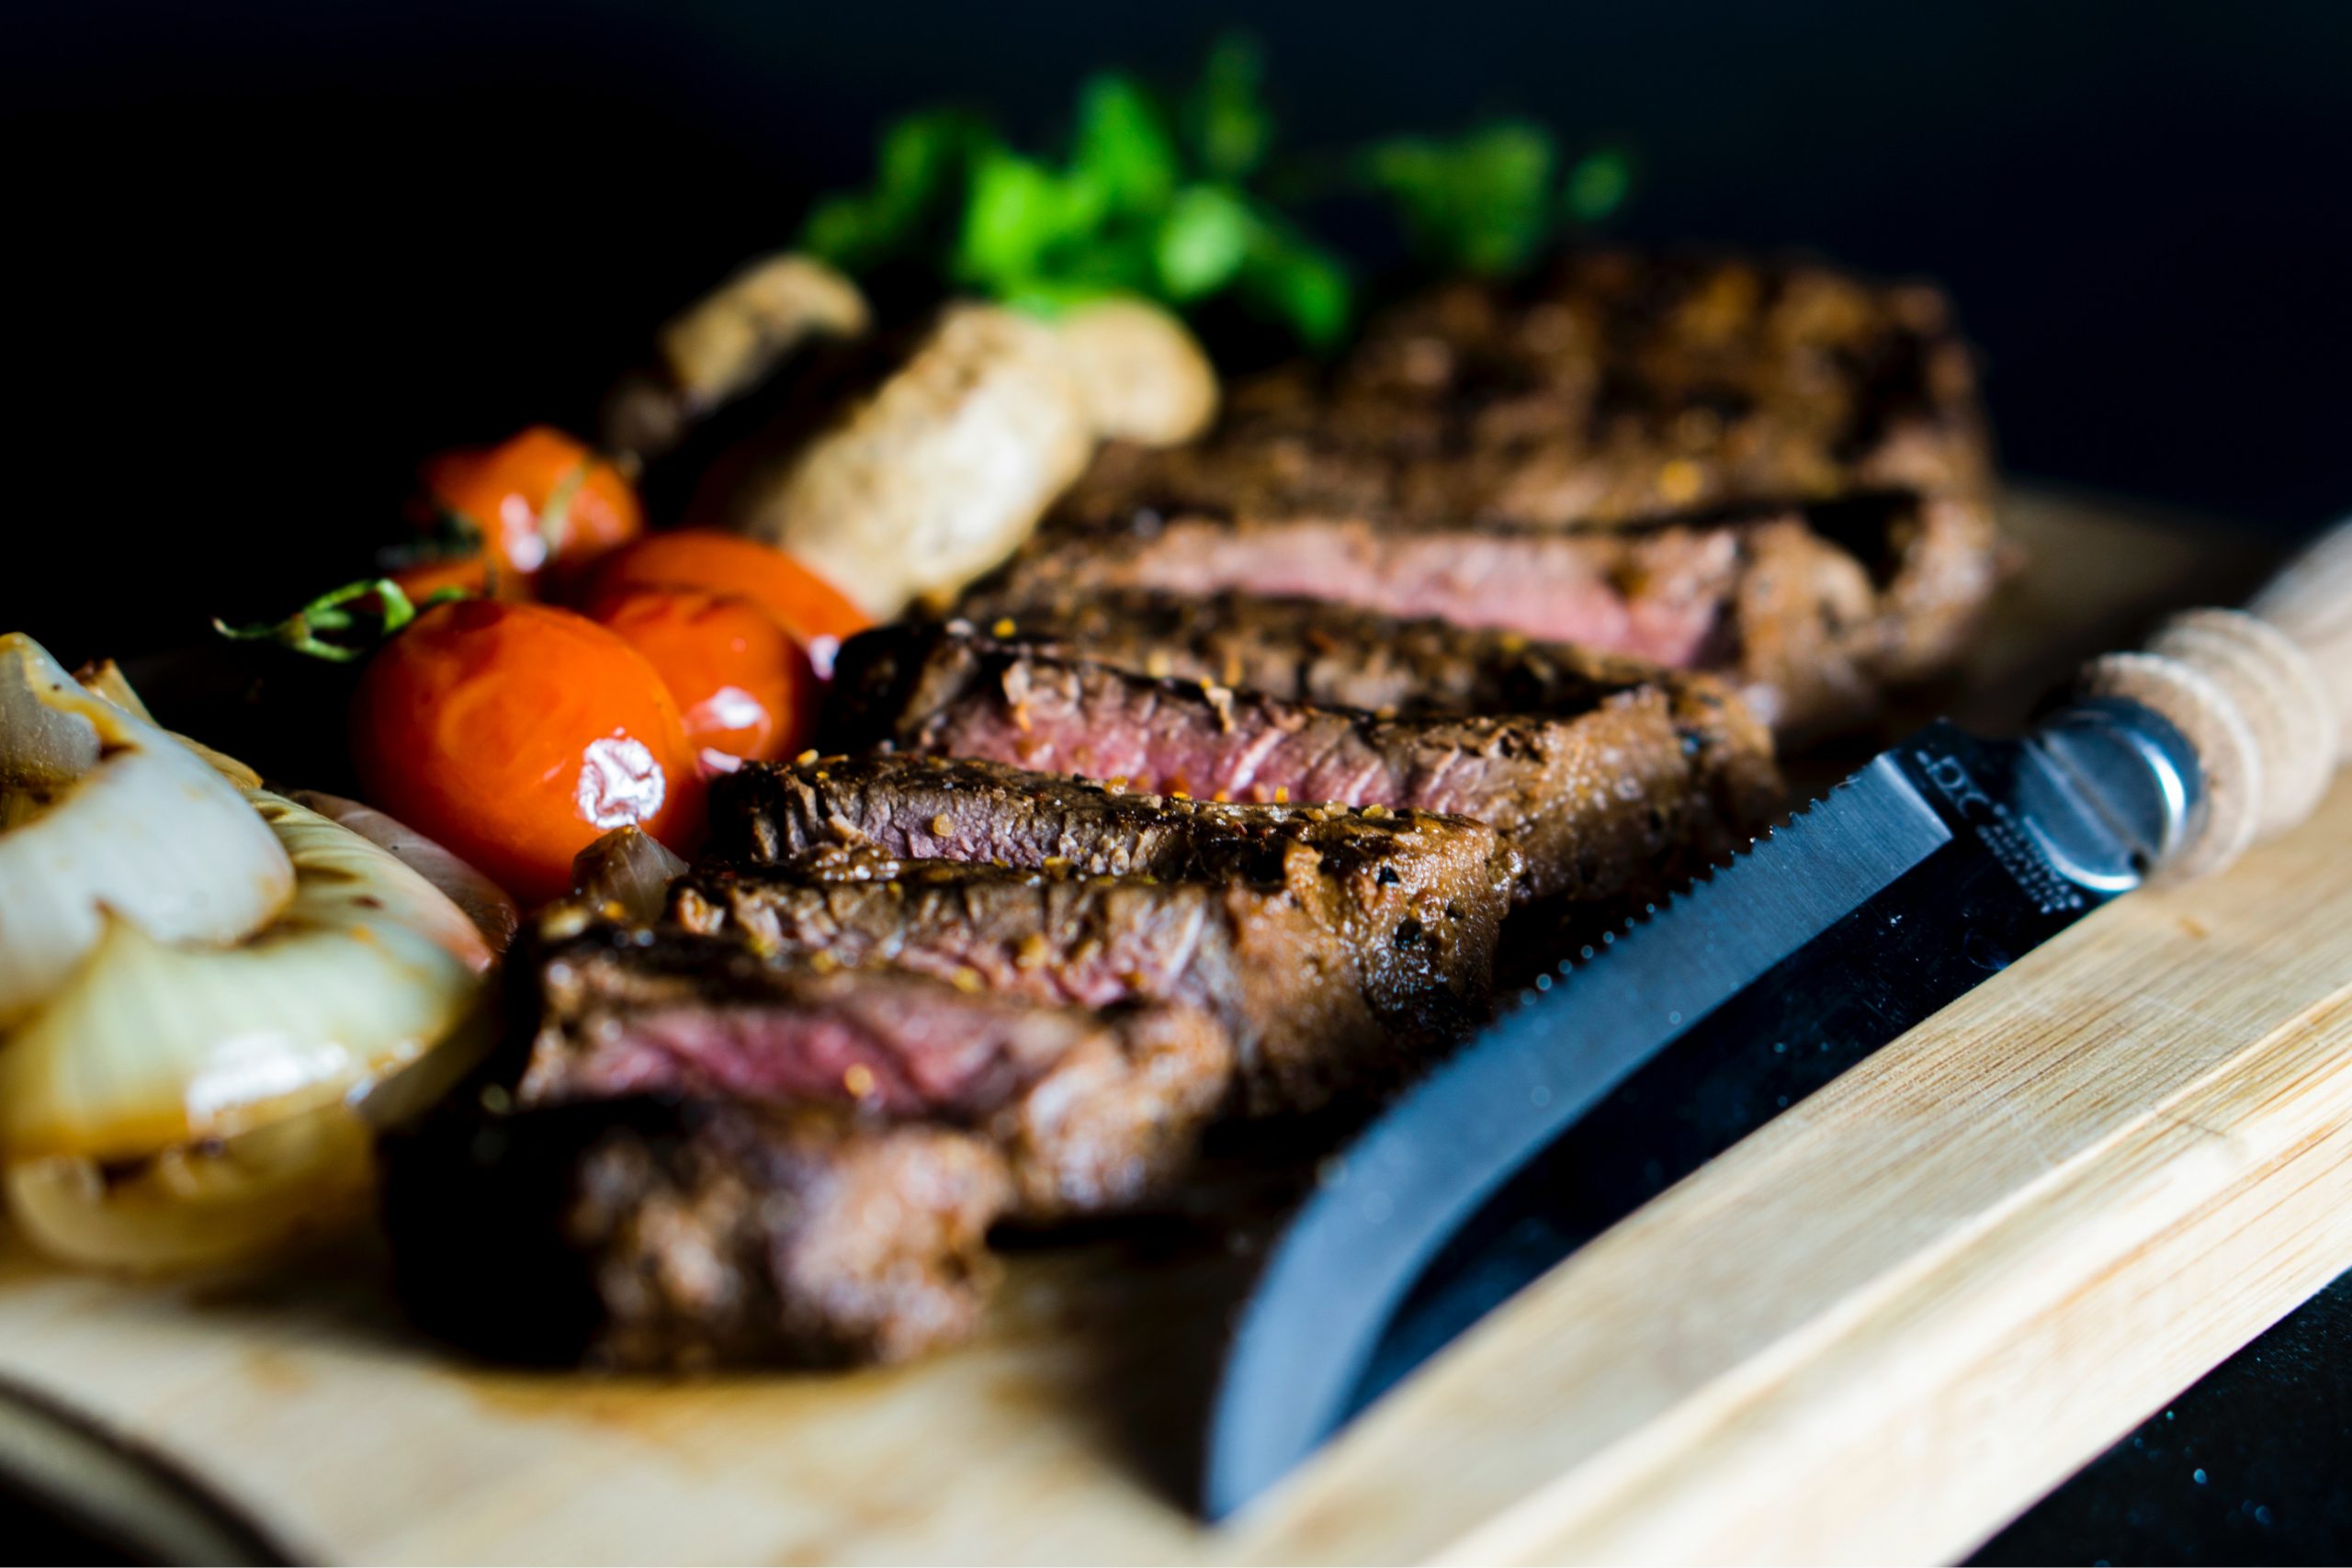 Best Way to Grill Steak on Charcoal â Top Tips